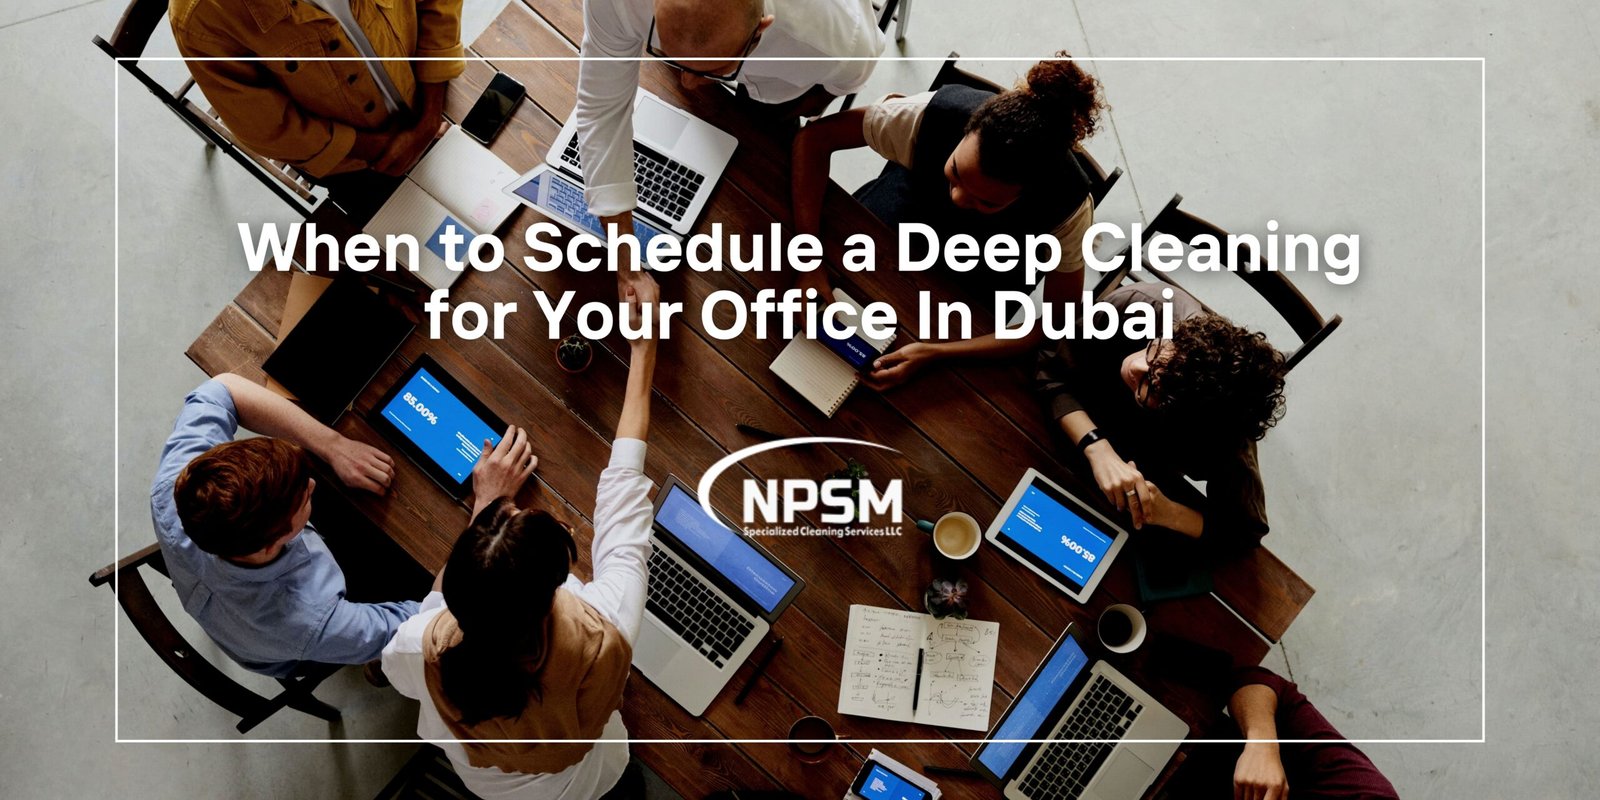 When to Schedule a Deep Cleaning for Your Office In Dubai